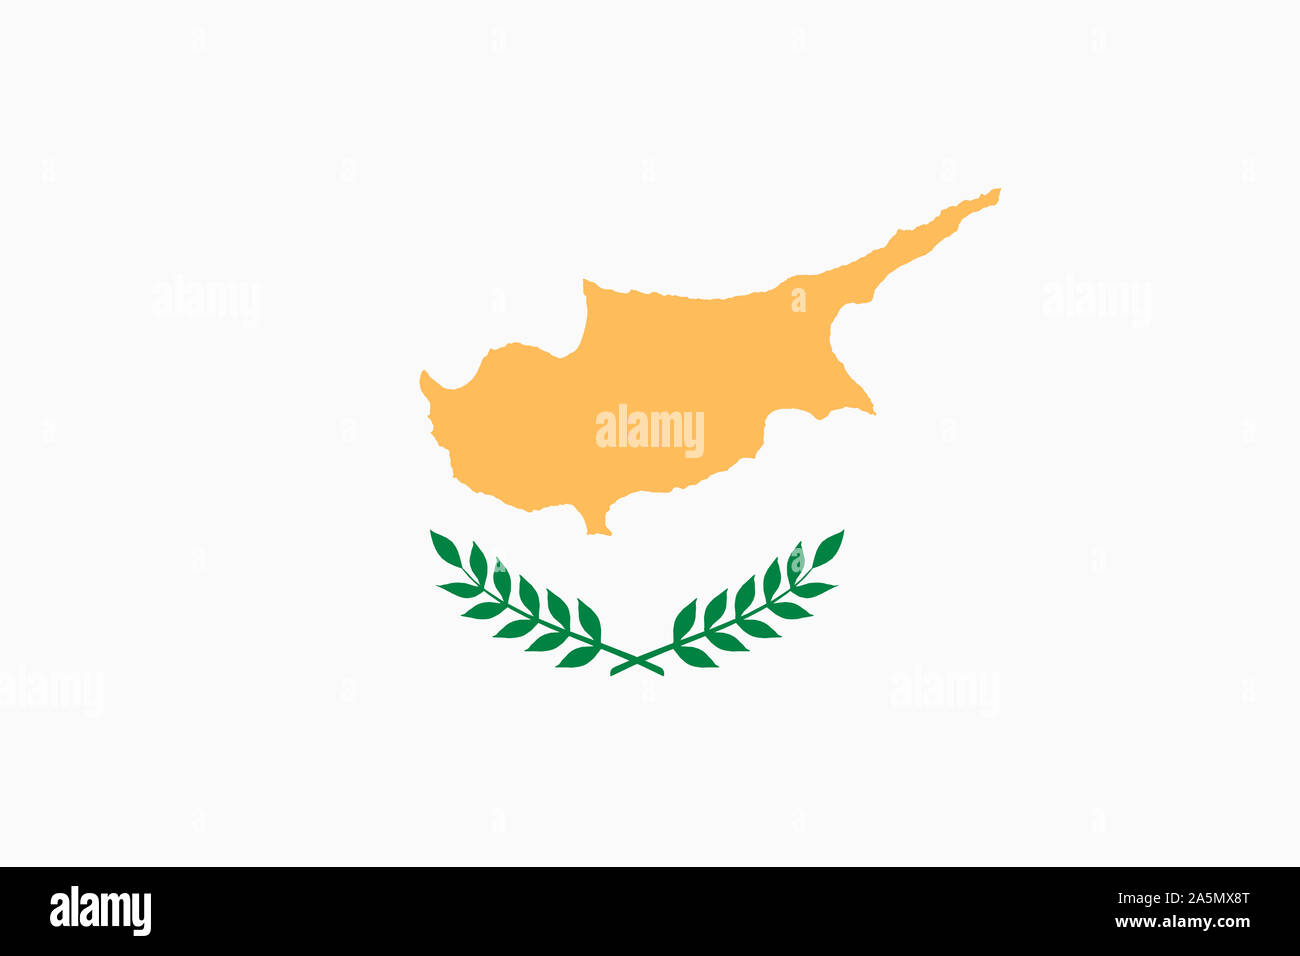 A Cyprus flag background illustration white gold olive branch Stock Photo